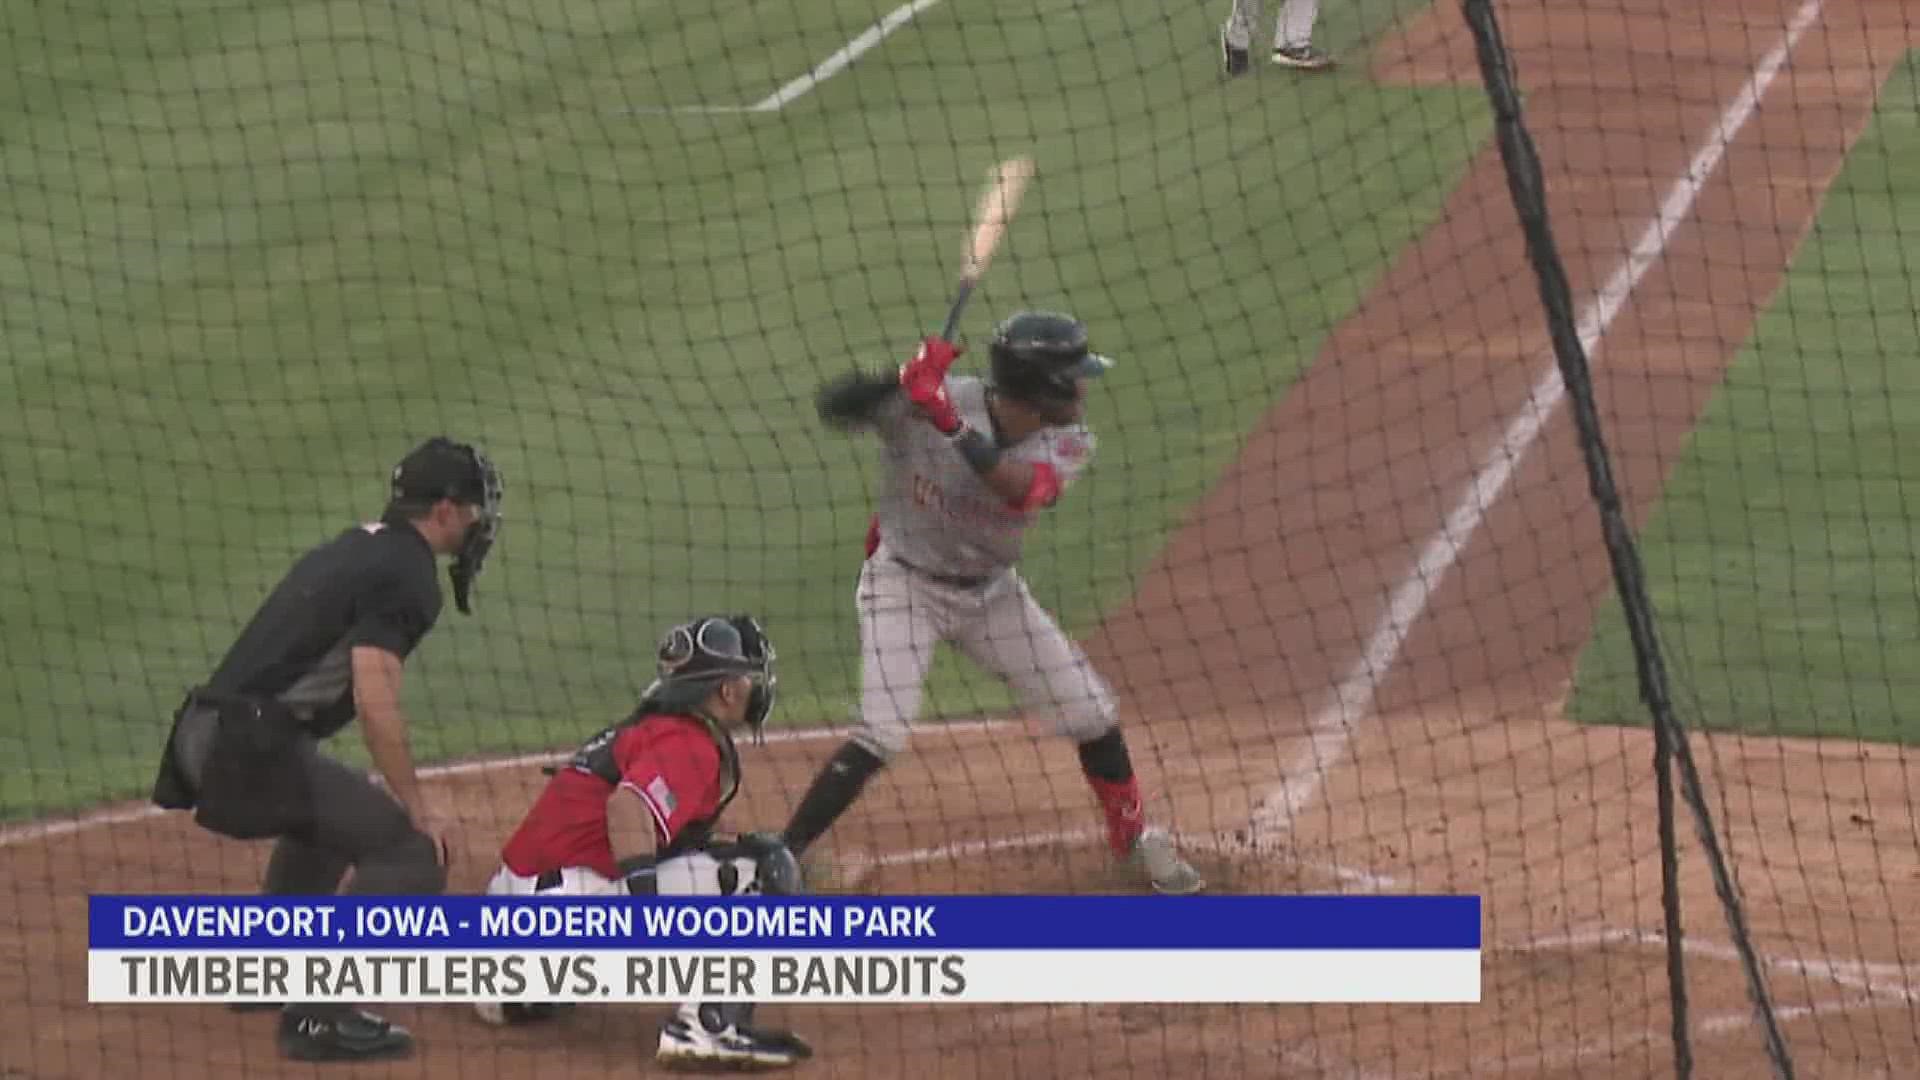 Game 4 of the 12-game homestead went to the Wisconsin Timber Rattlers after the bandits couldn't get the offense going.